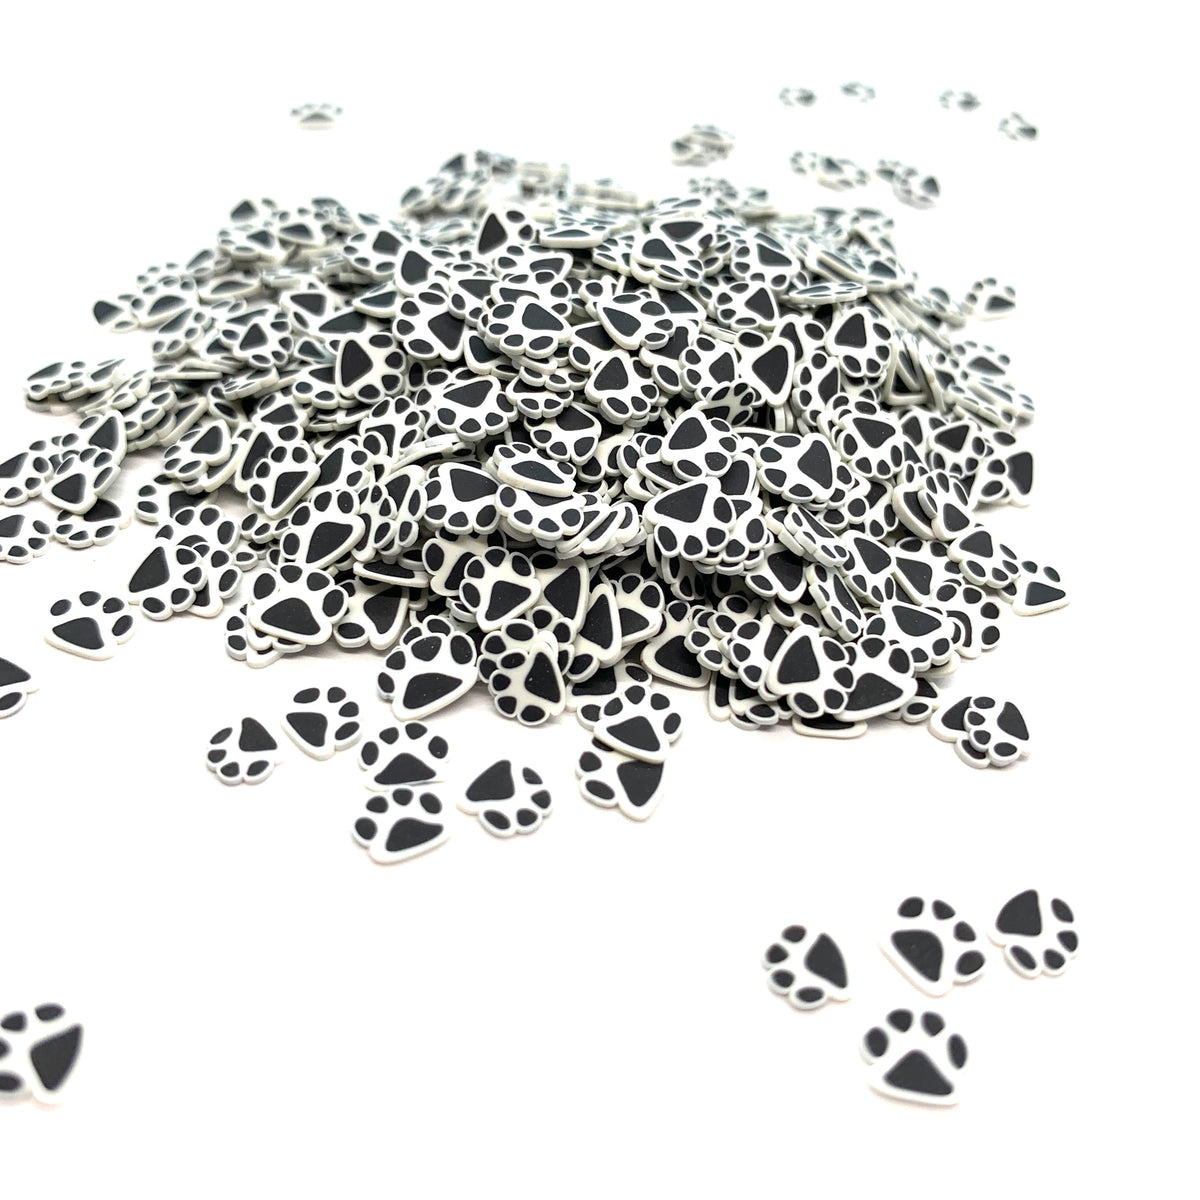 Pet Paws Polymer Clay Pieces for Epoxy and UV Resin Art - Black and Wh -  Resin Rockers